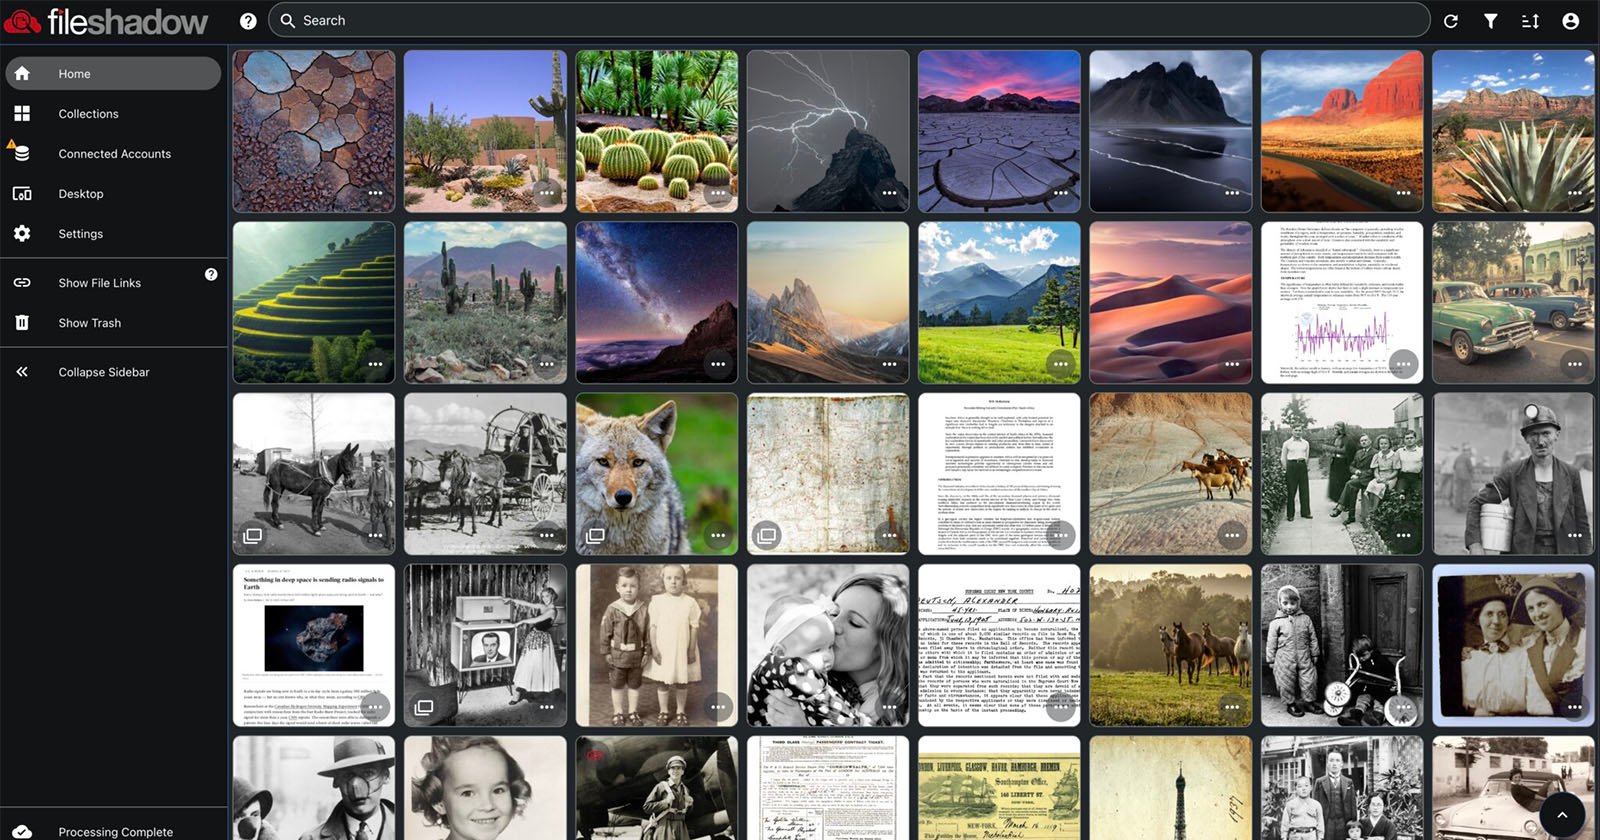 FileShadow Update Makes It Easier for Photographers to Find Specific Images [Video]